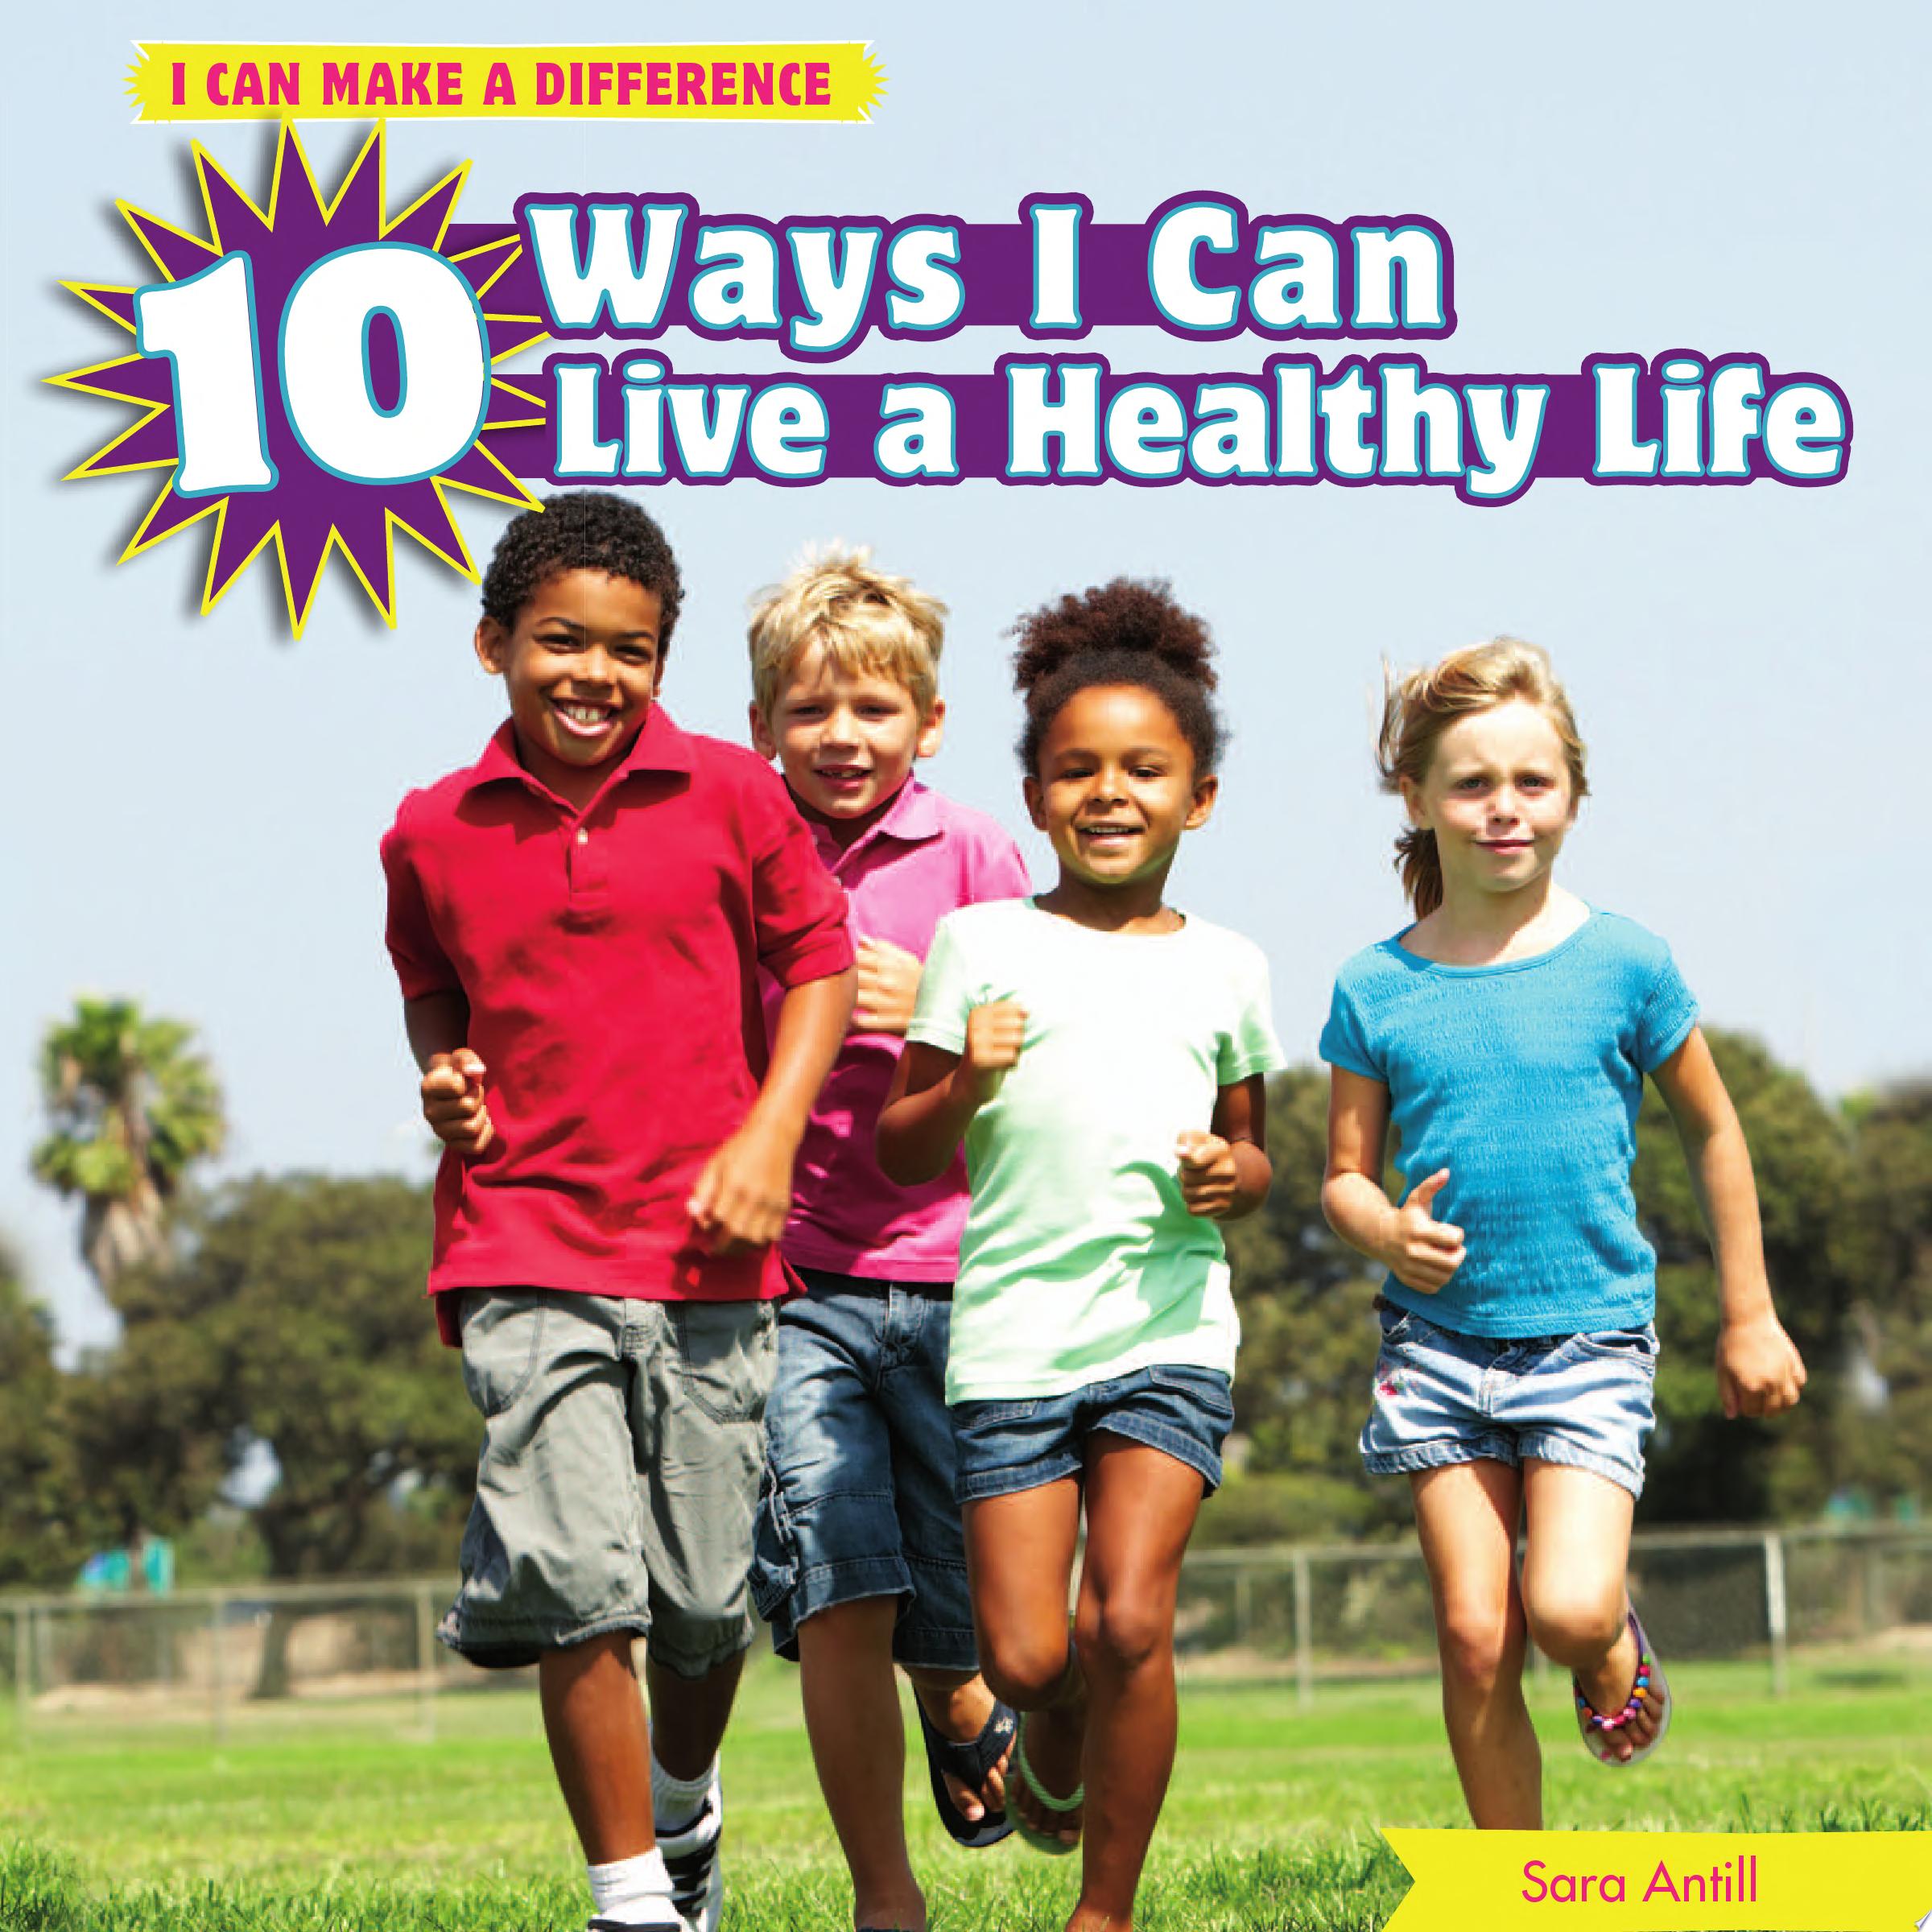 Image for "10 Ways I Can Live a Healthy Life"